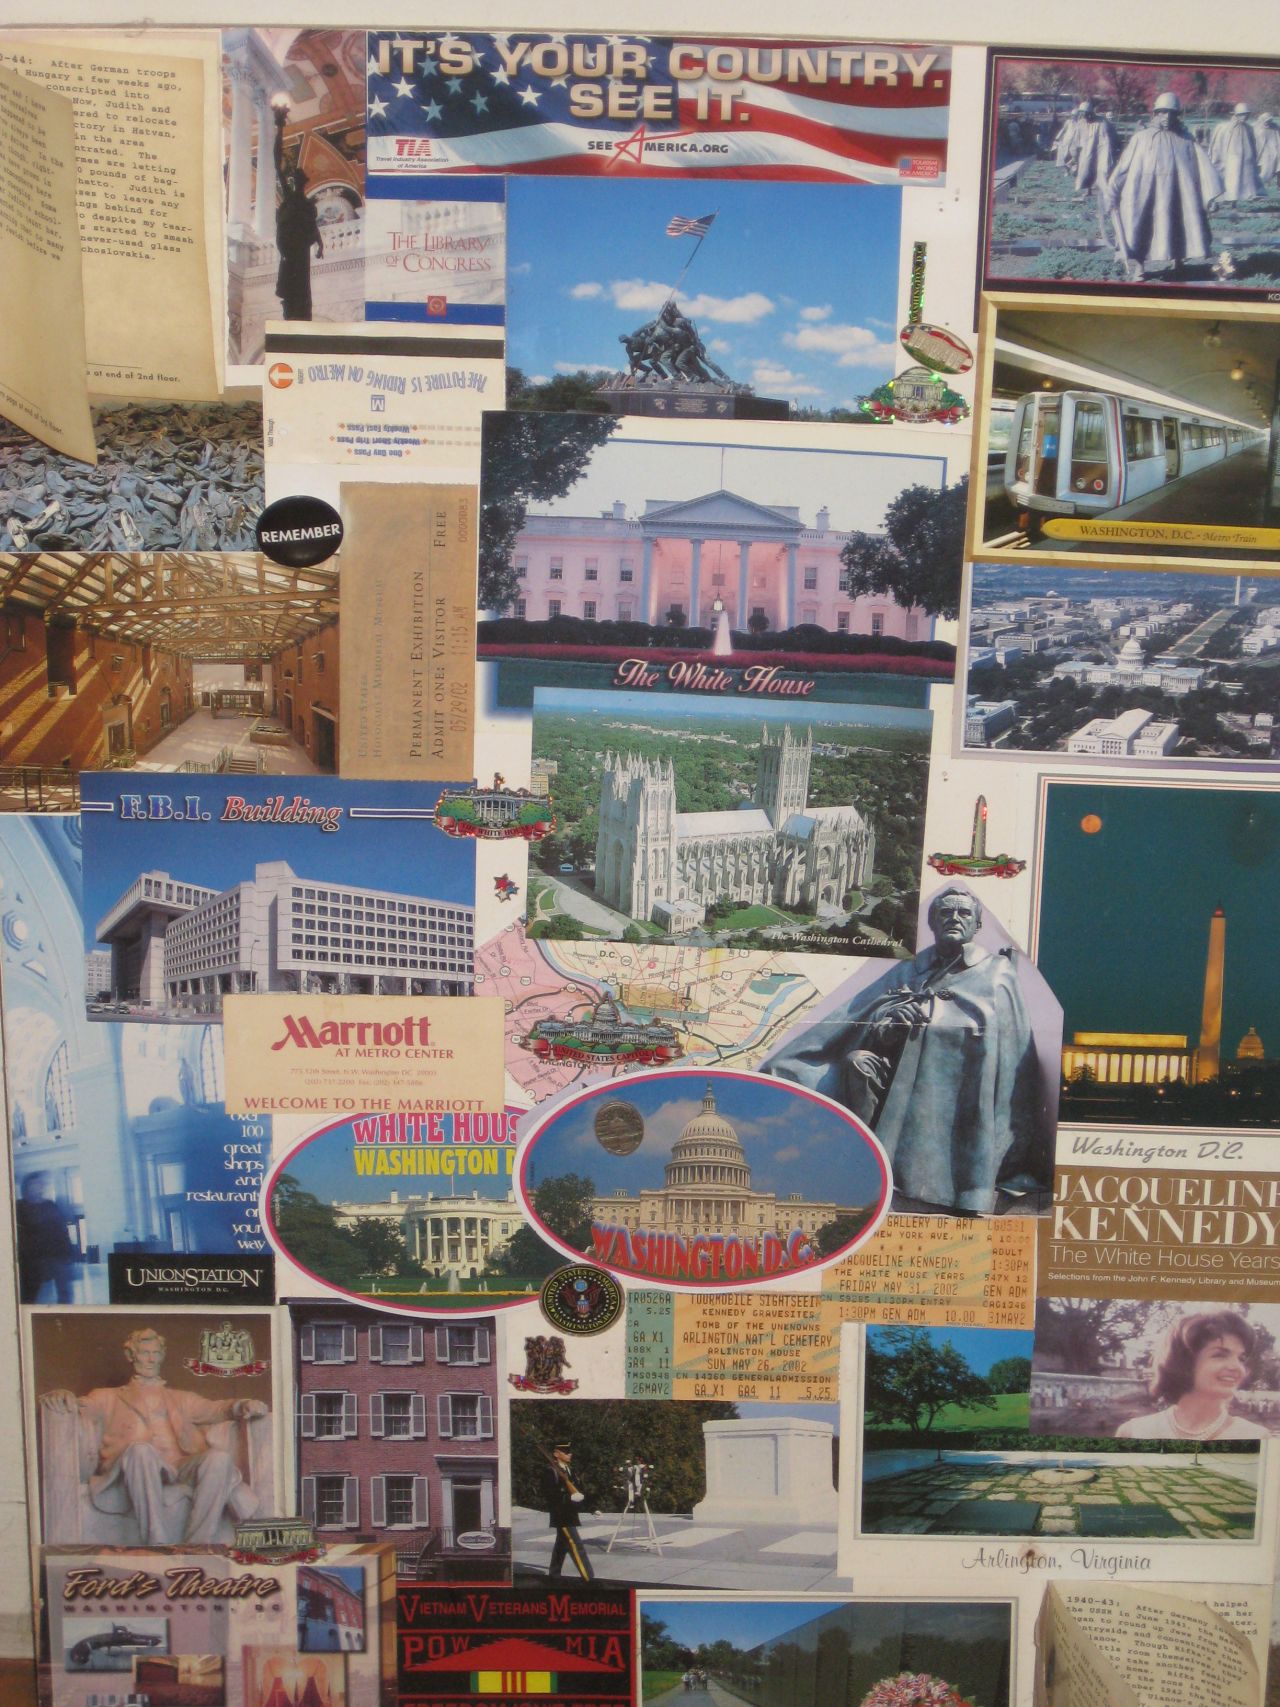 Kathi Cordsen and her mother took a trip to Washington, D.C., for Mother's Day 2002, but forgot a camera. Instead, they picked up postcards, stickers and pins at locations they visited, and Cordsen still has the collage she made to remember all the sites they visited together.